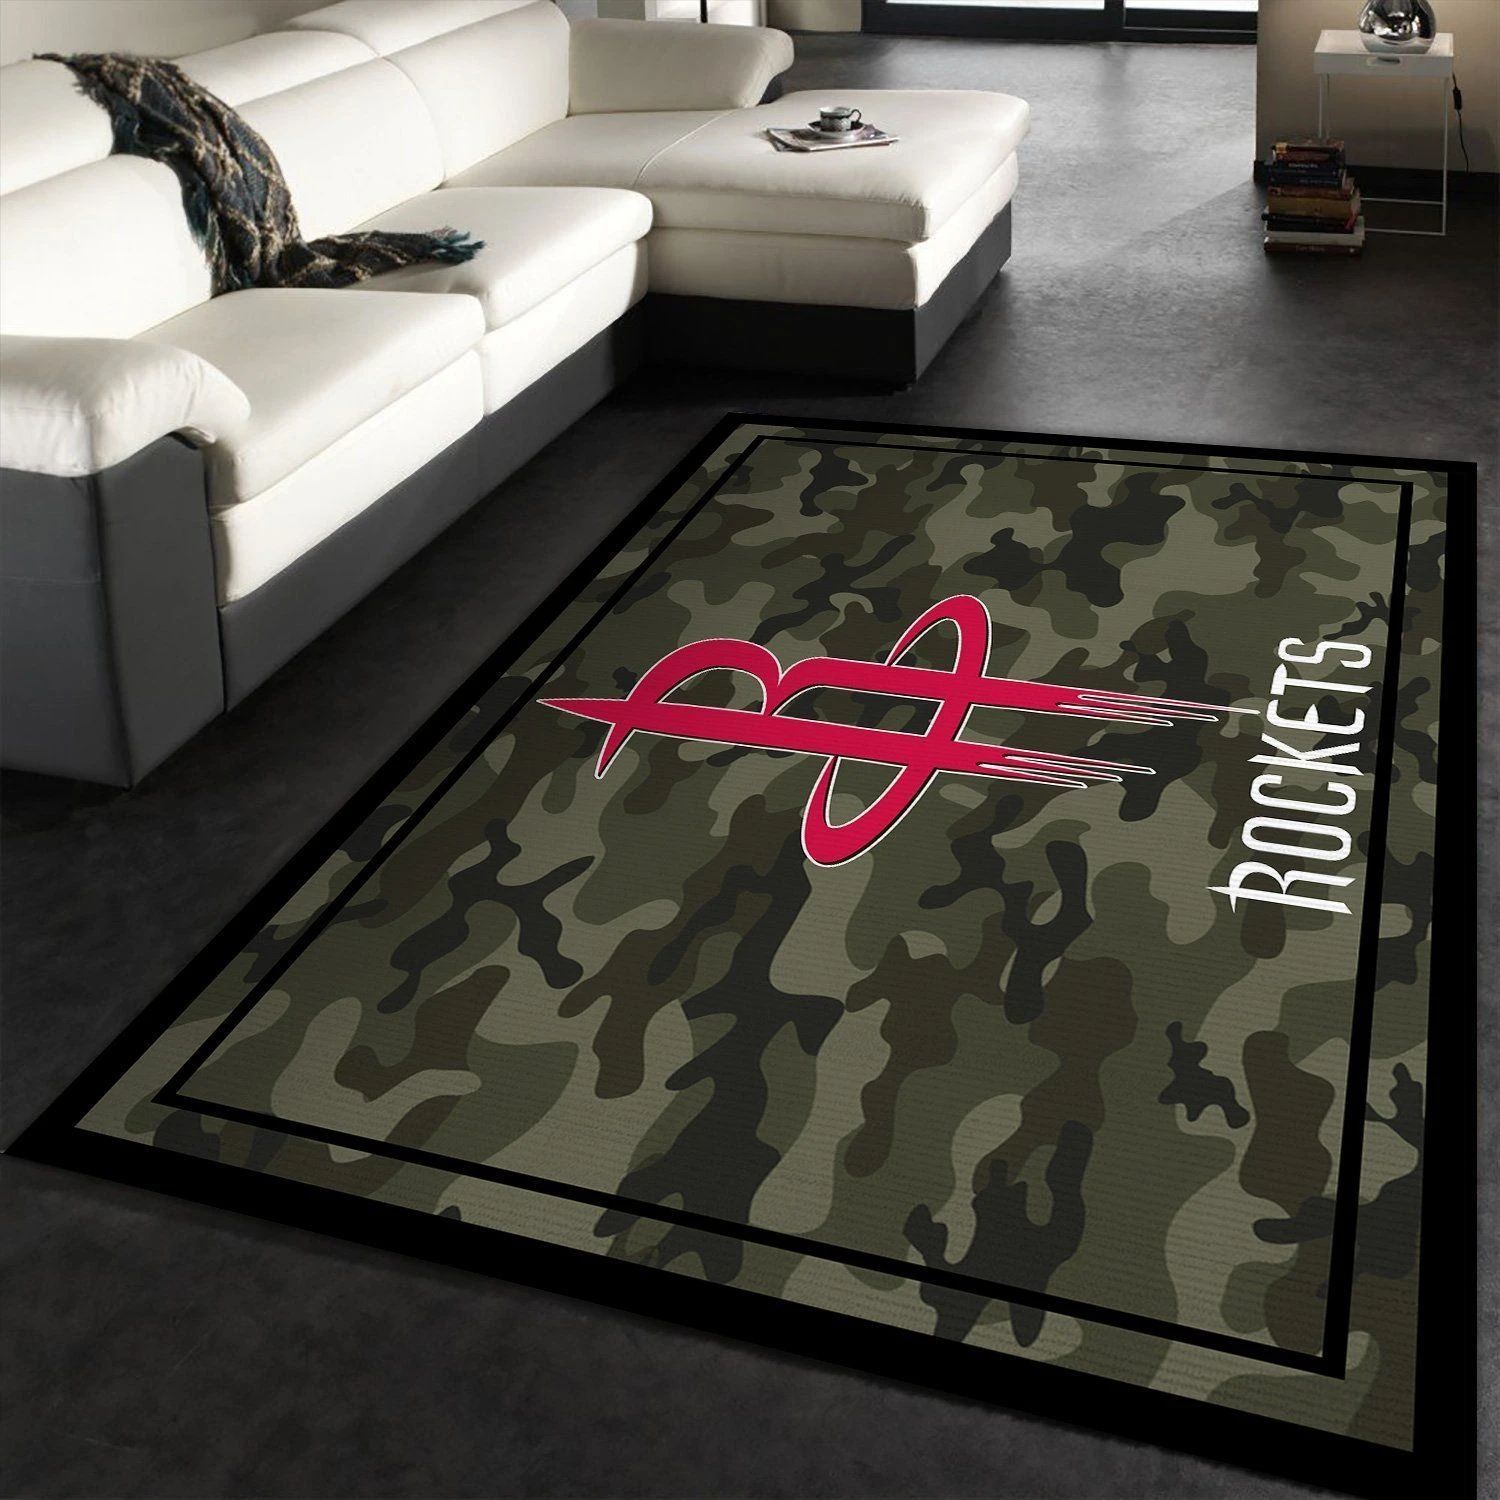 Houston Rockets Nba Team Logo Camo Style Nice Gift Home Decor Area Rug Rugs For Living Room - Indoor Outdoor Rugs